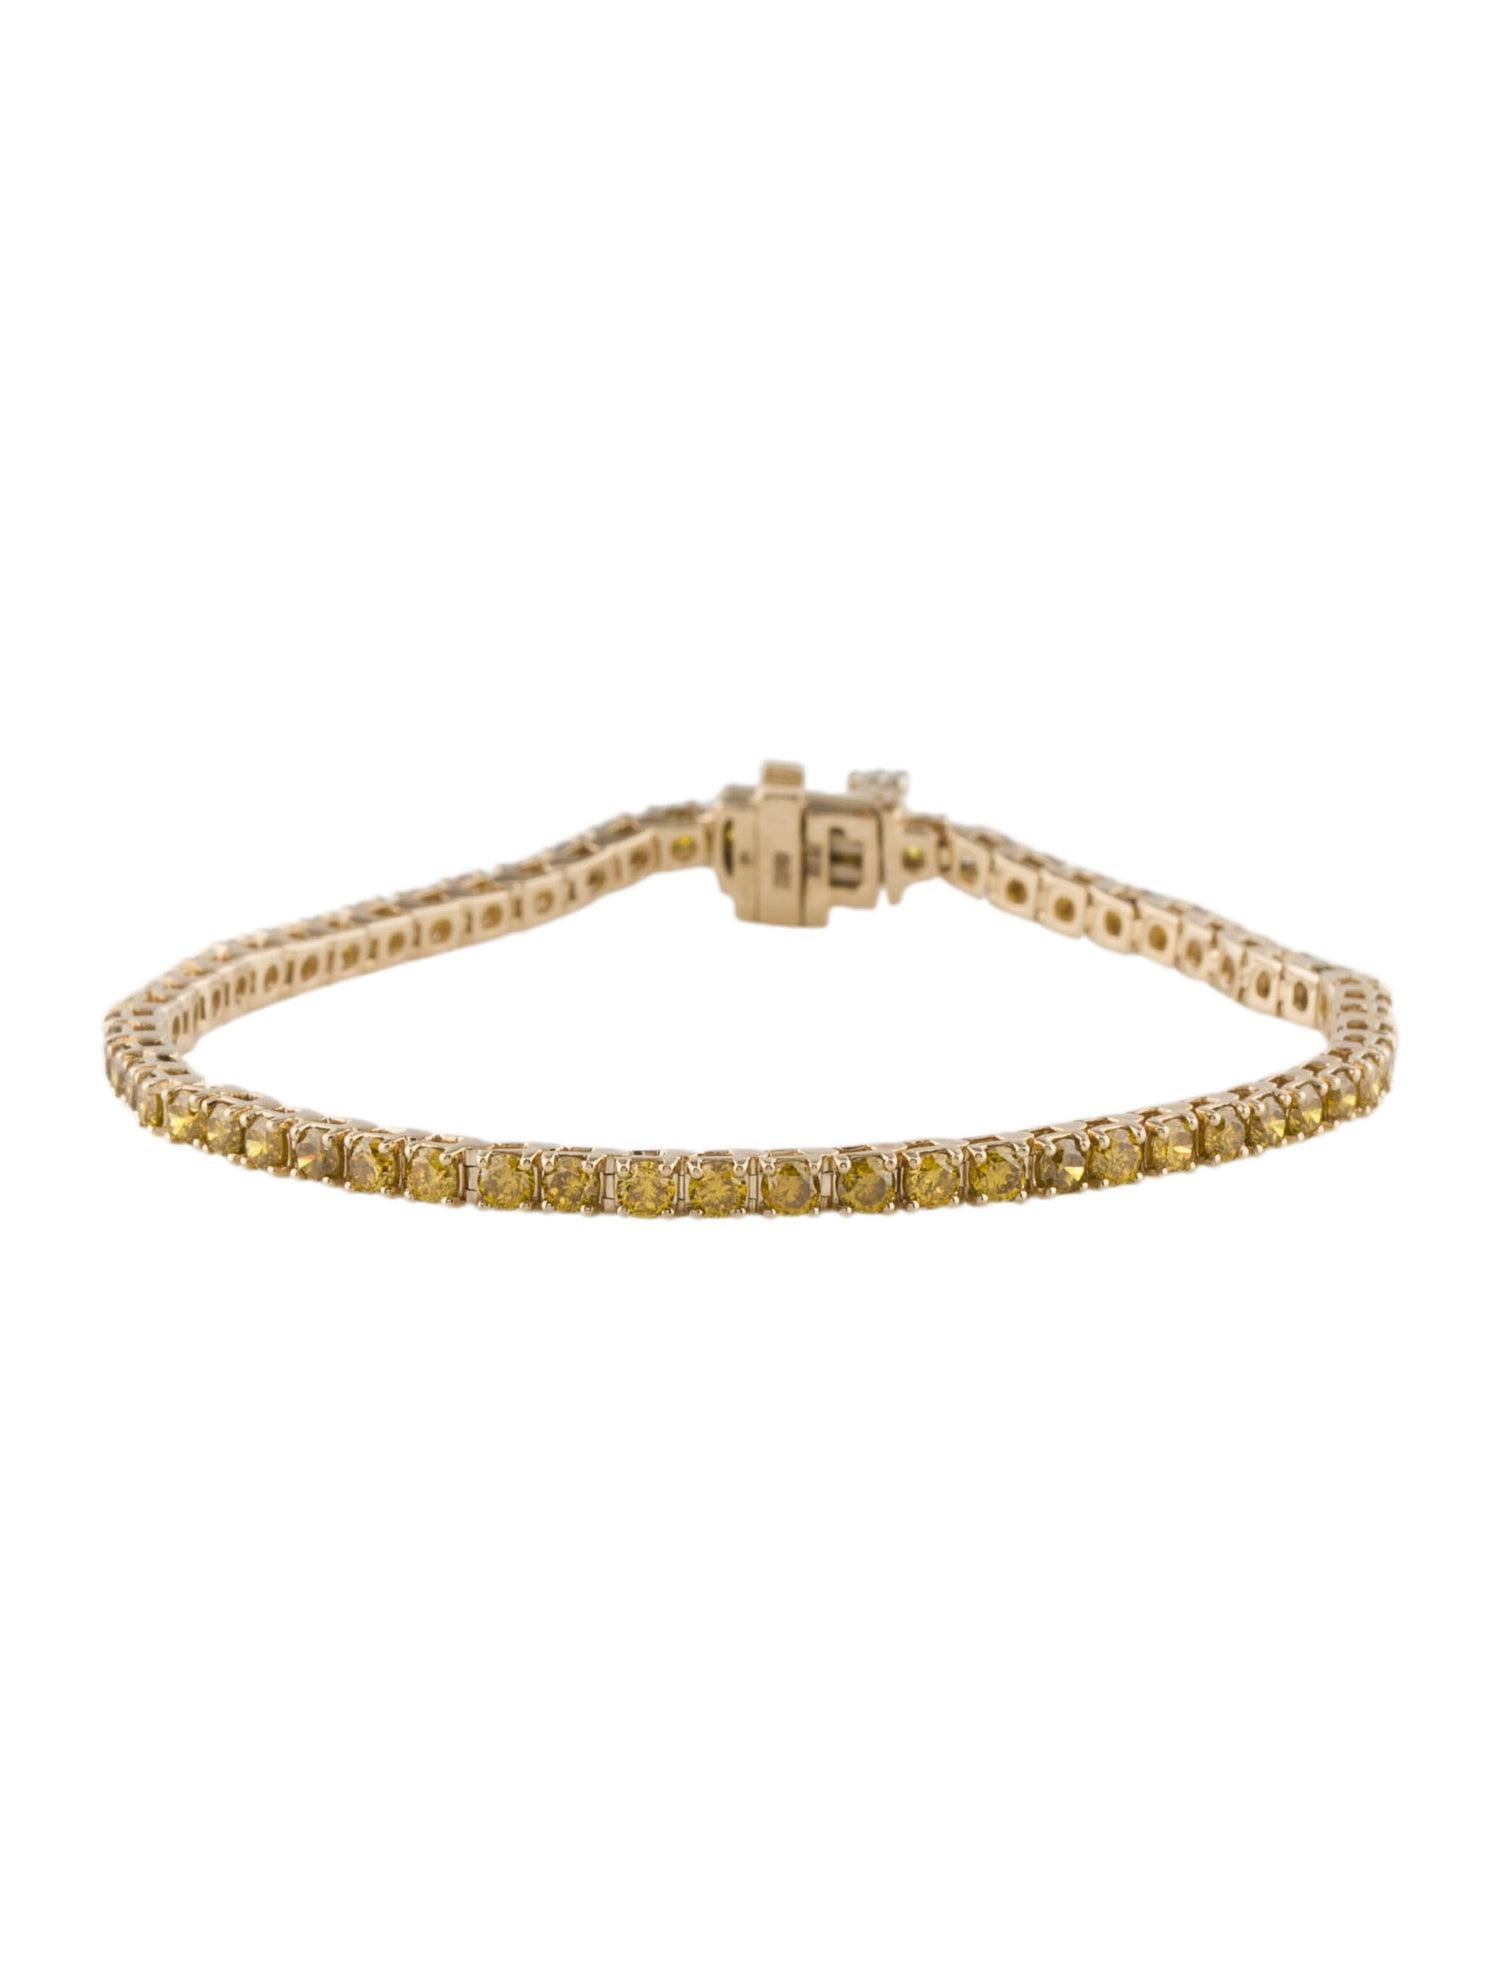 14K 3.54ctw Lab-Grown Diamond Tennis Bracelet - Timeless & Luxurious Design In New Condition For Sale In Holtsville, NY